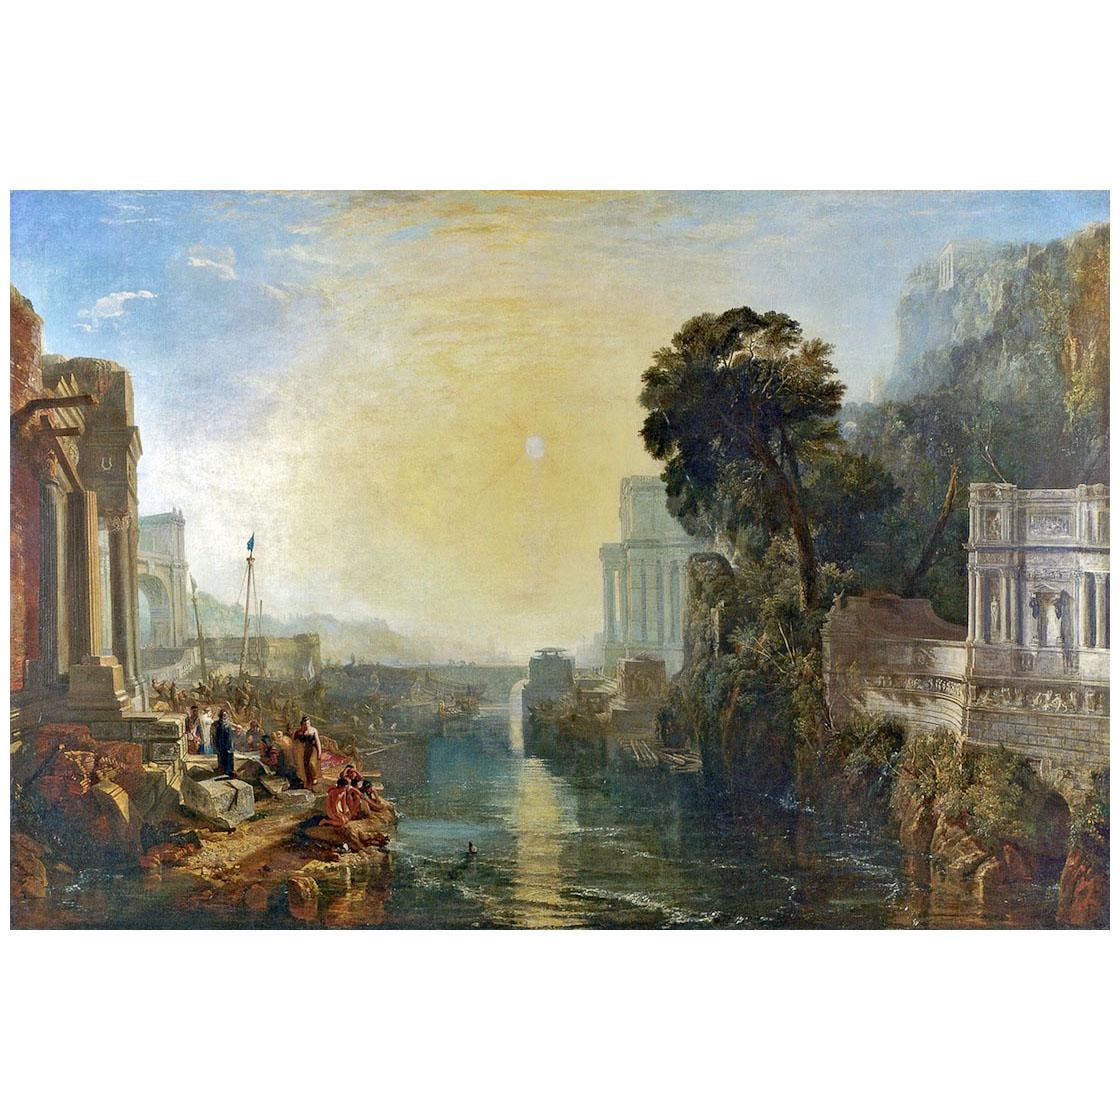 William Turner. Dido building Carthage. 1815. National Gallery London